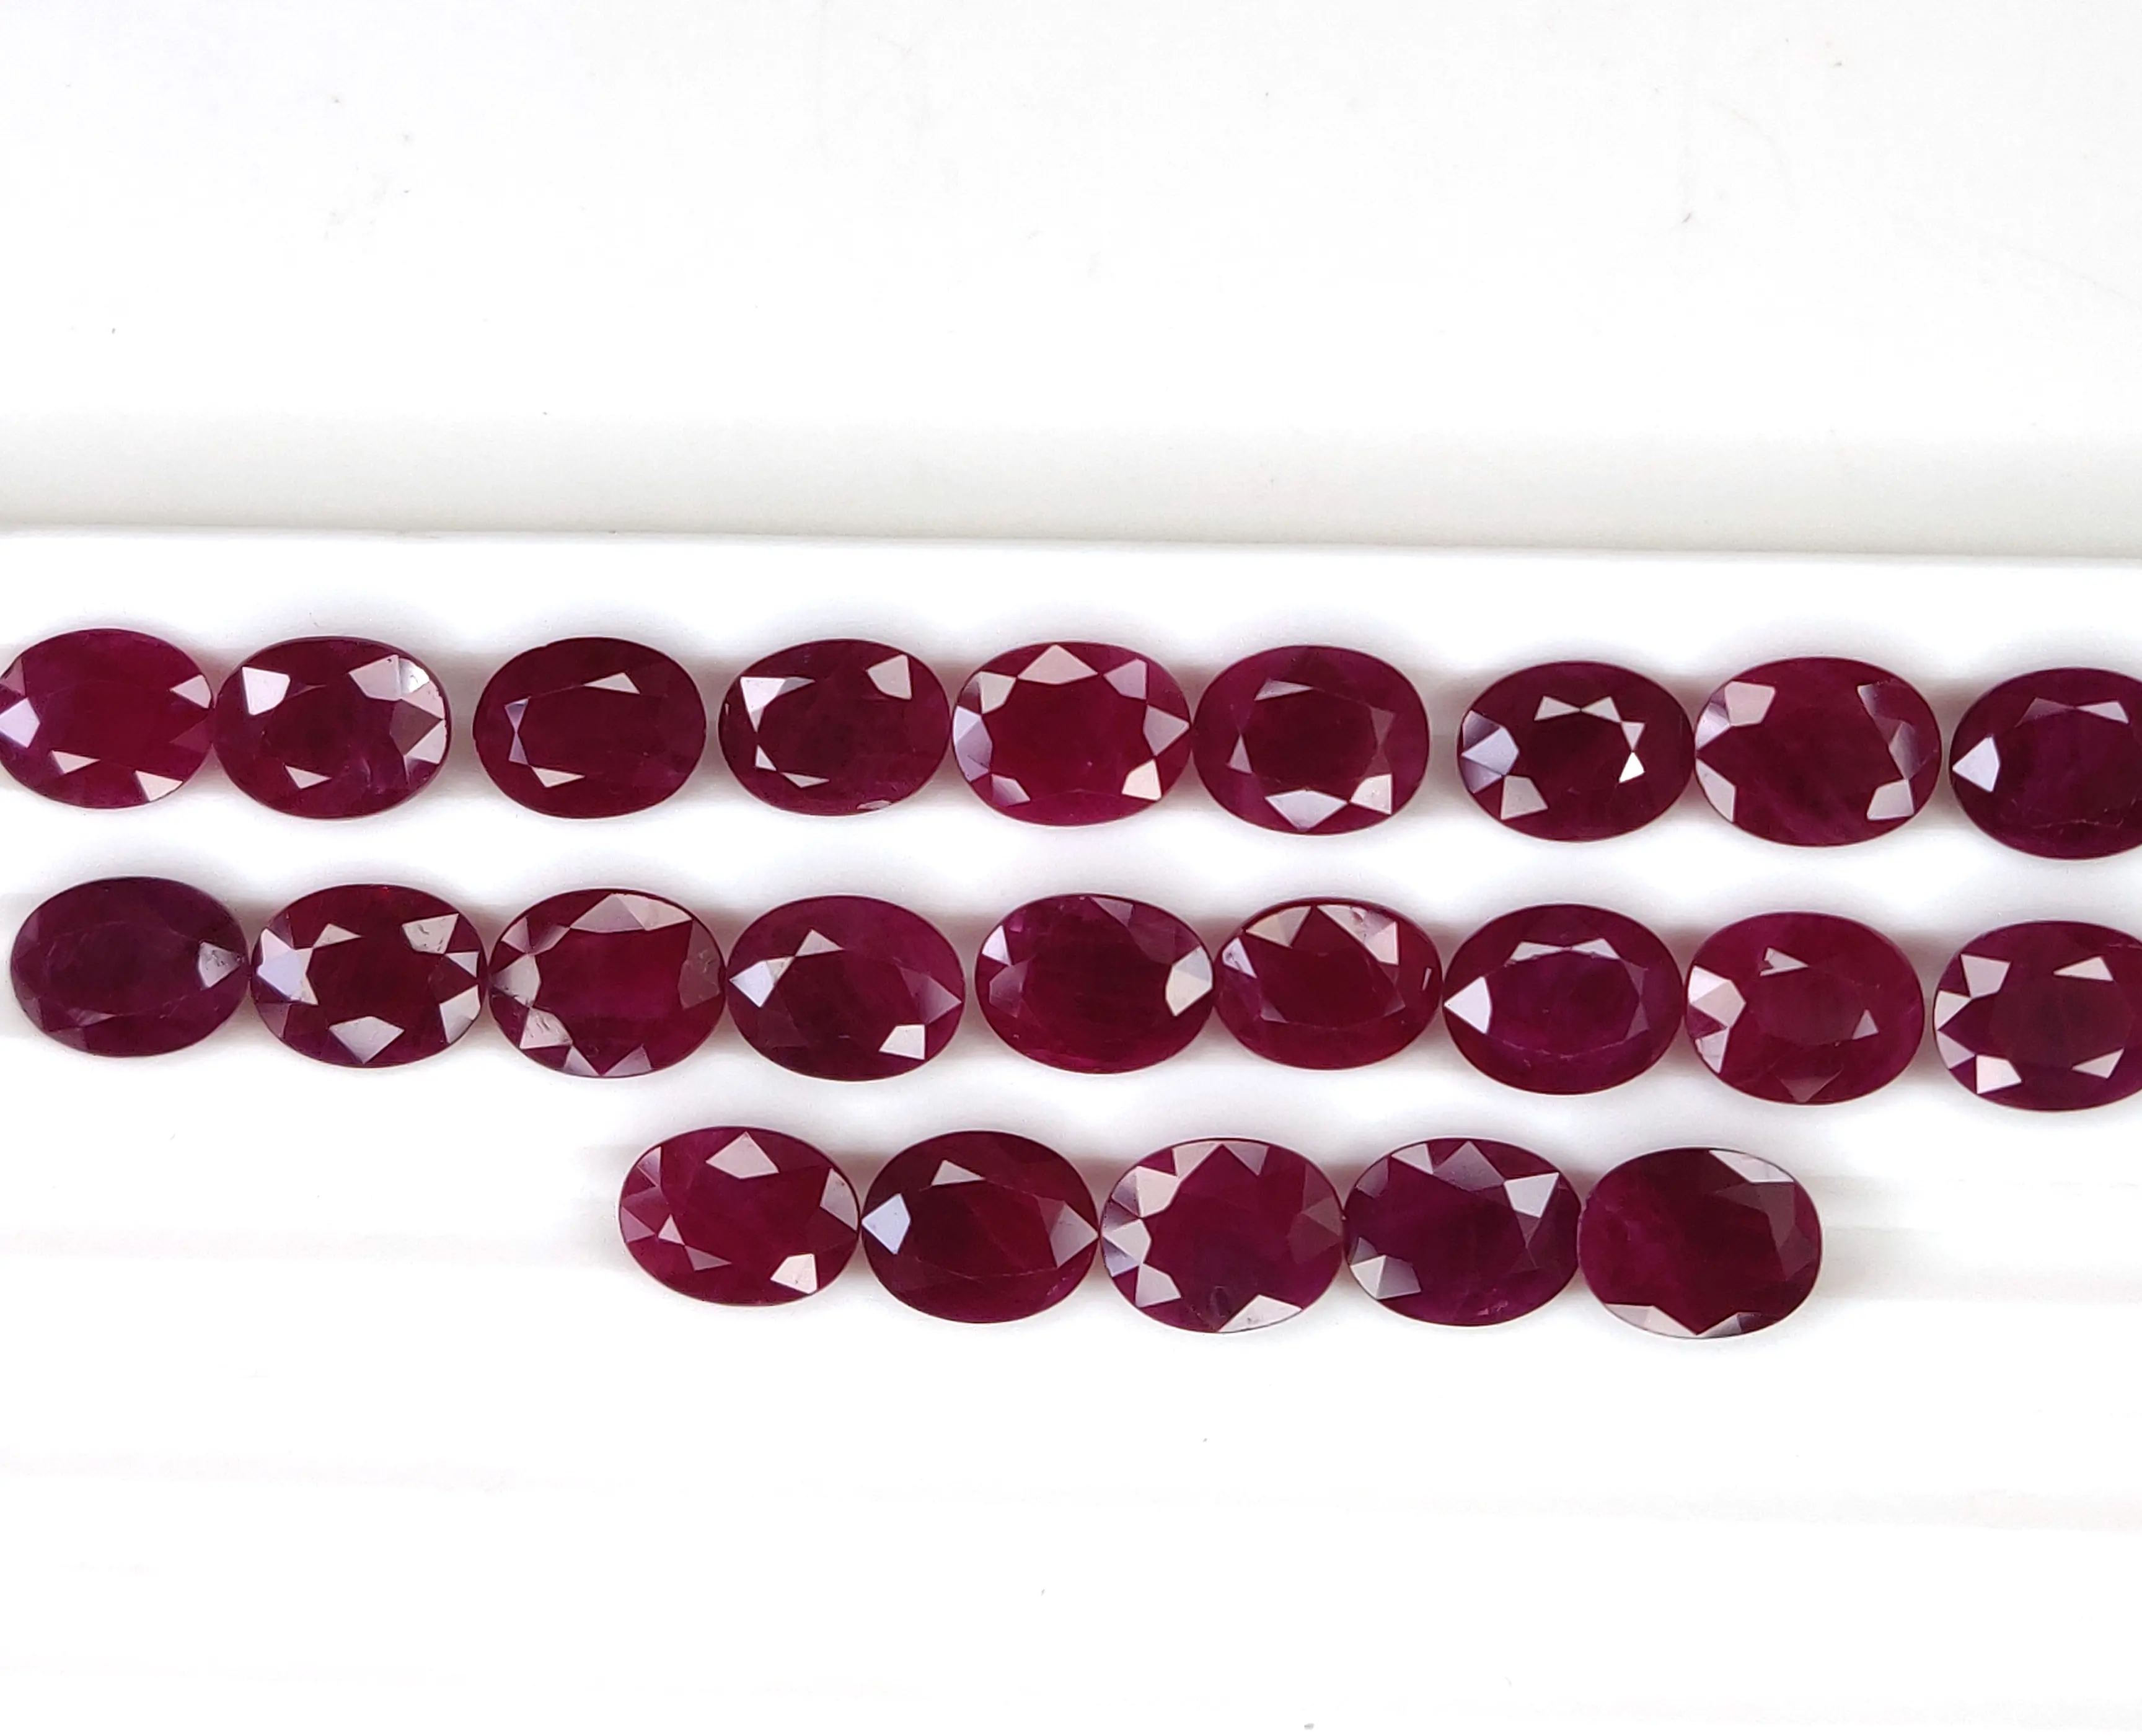 Oval Shape 7x9mm Natural Burma Ruby Faceted Stone Heat Treatment Stone 58 Carat Lot For Attractive Women Gems Jewelry